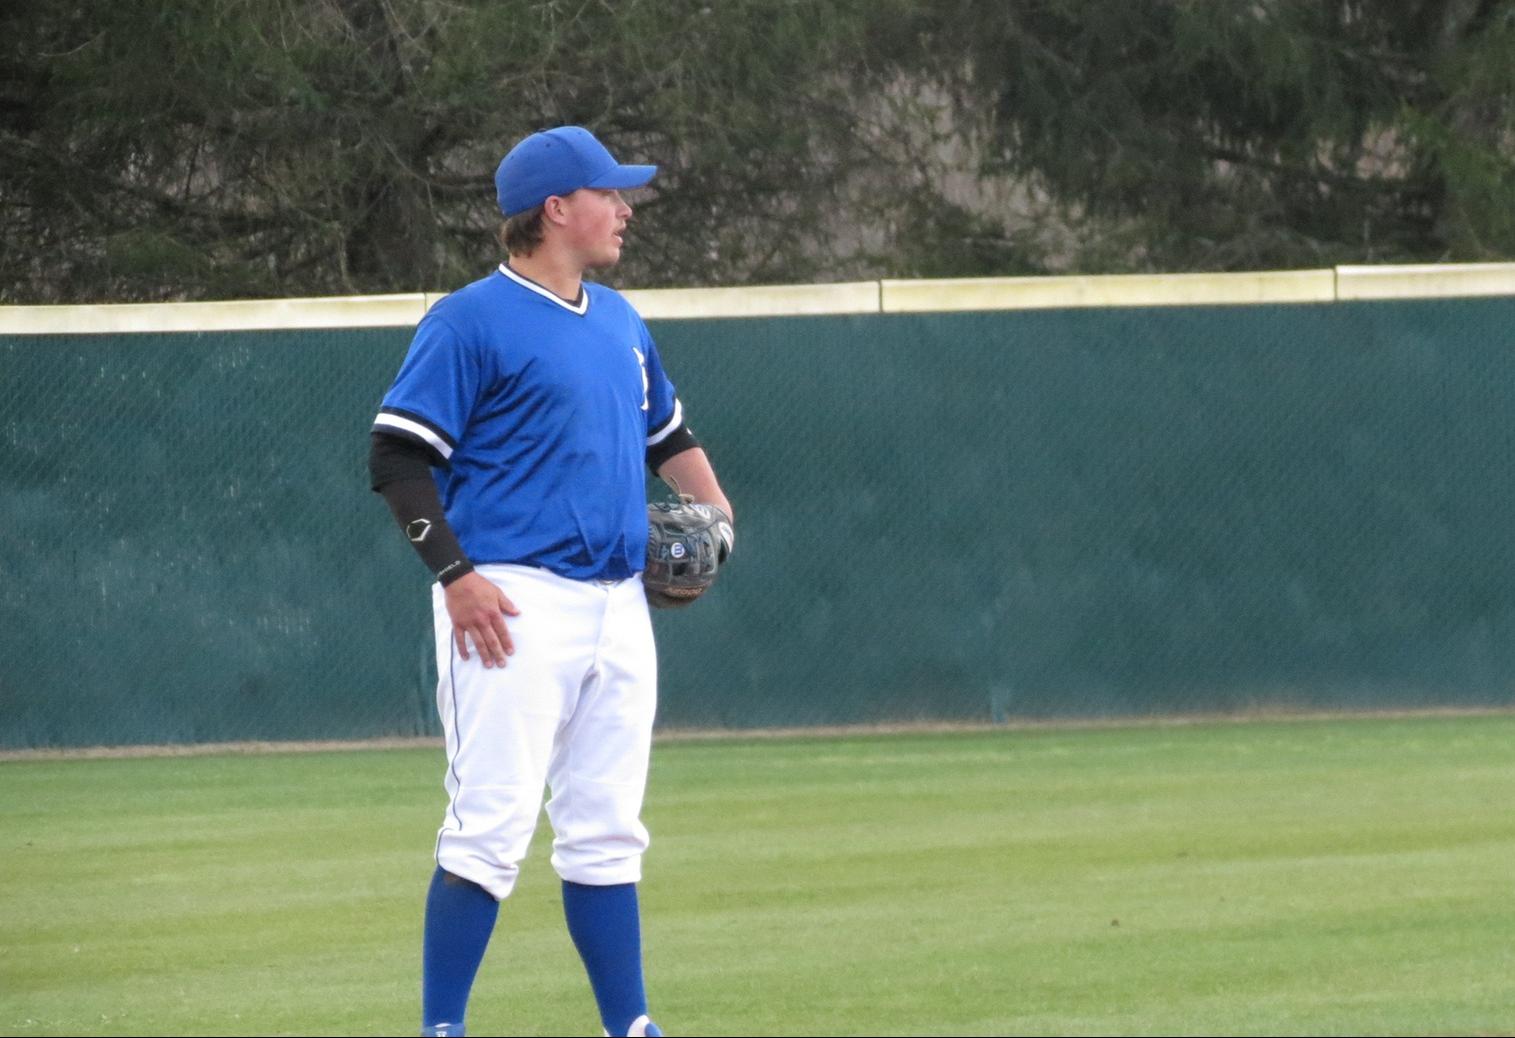 Brevard Falls to Pfeiffer in Final Game of Series